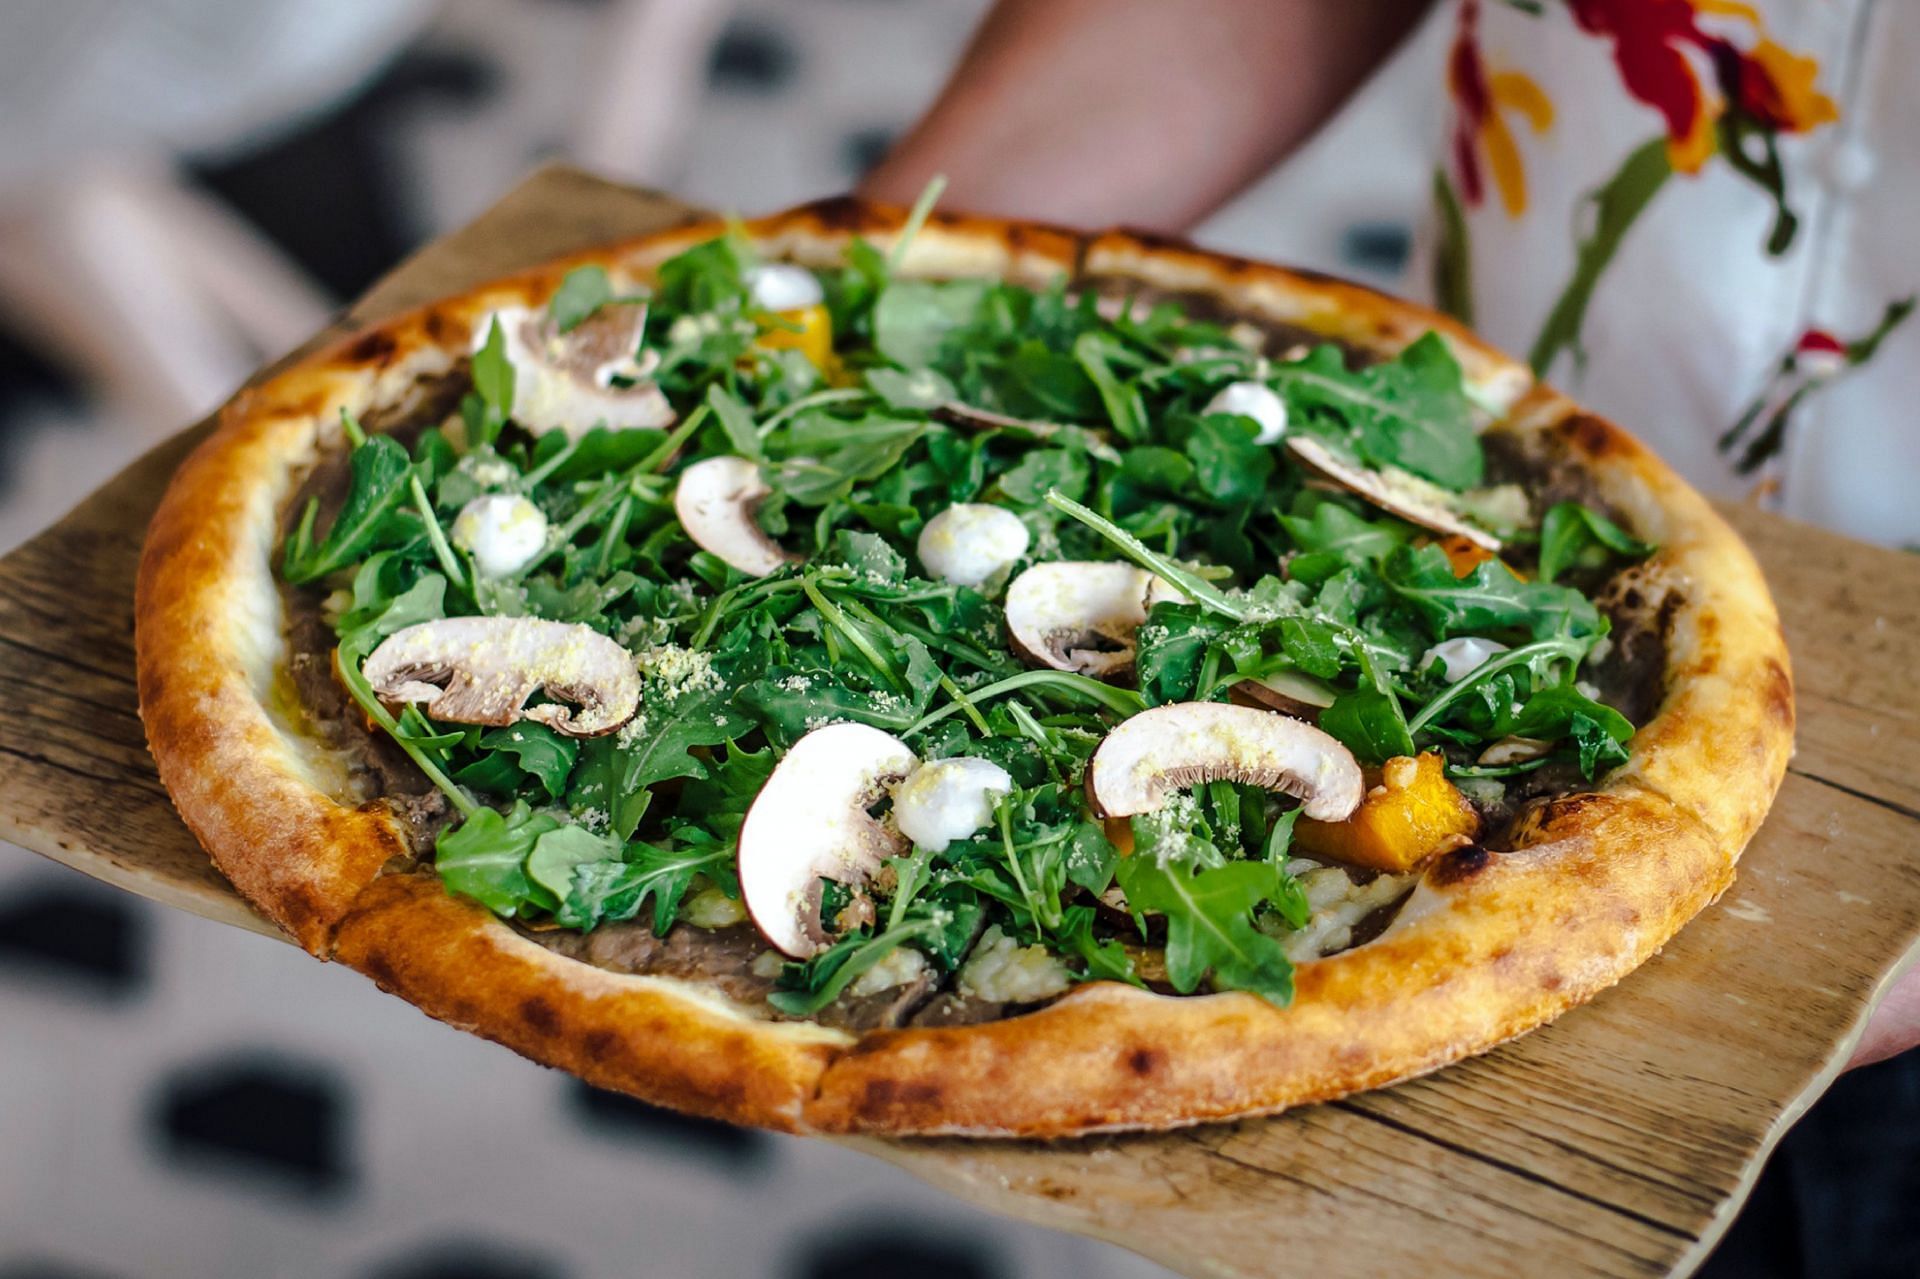 Arugula an be used as a topping. (Image via Pexels/Romjan Aly)